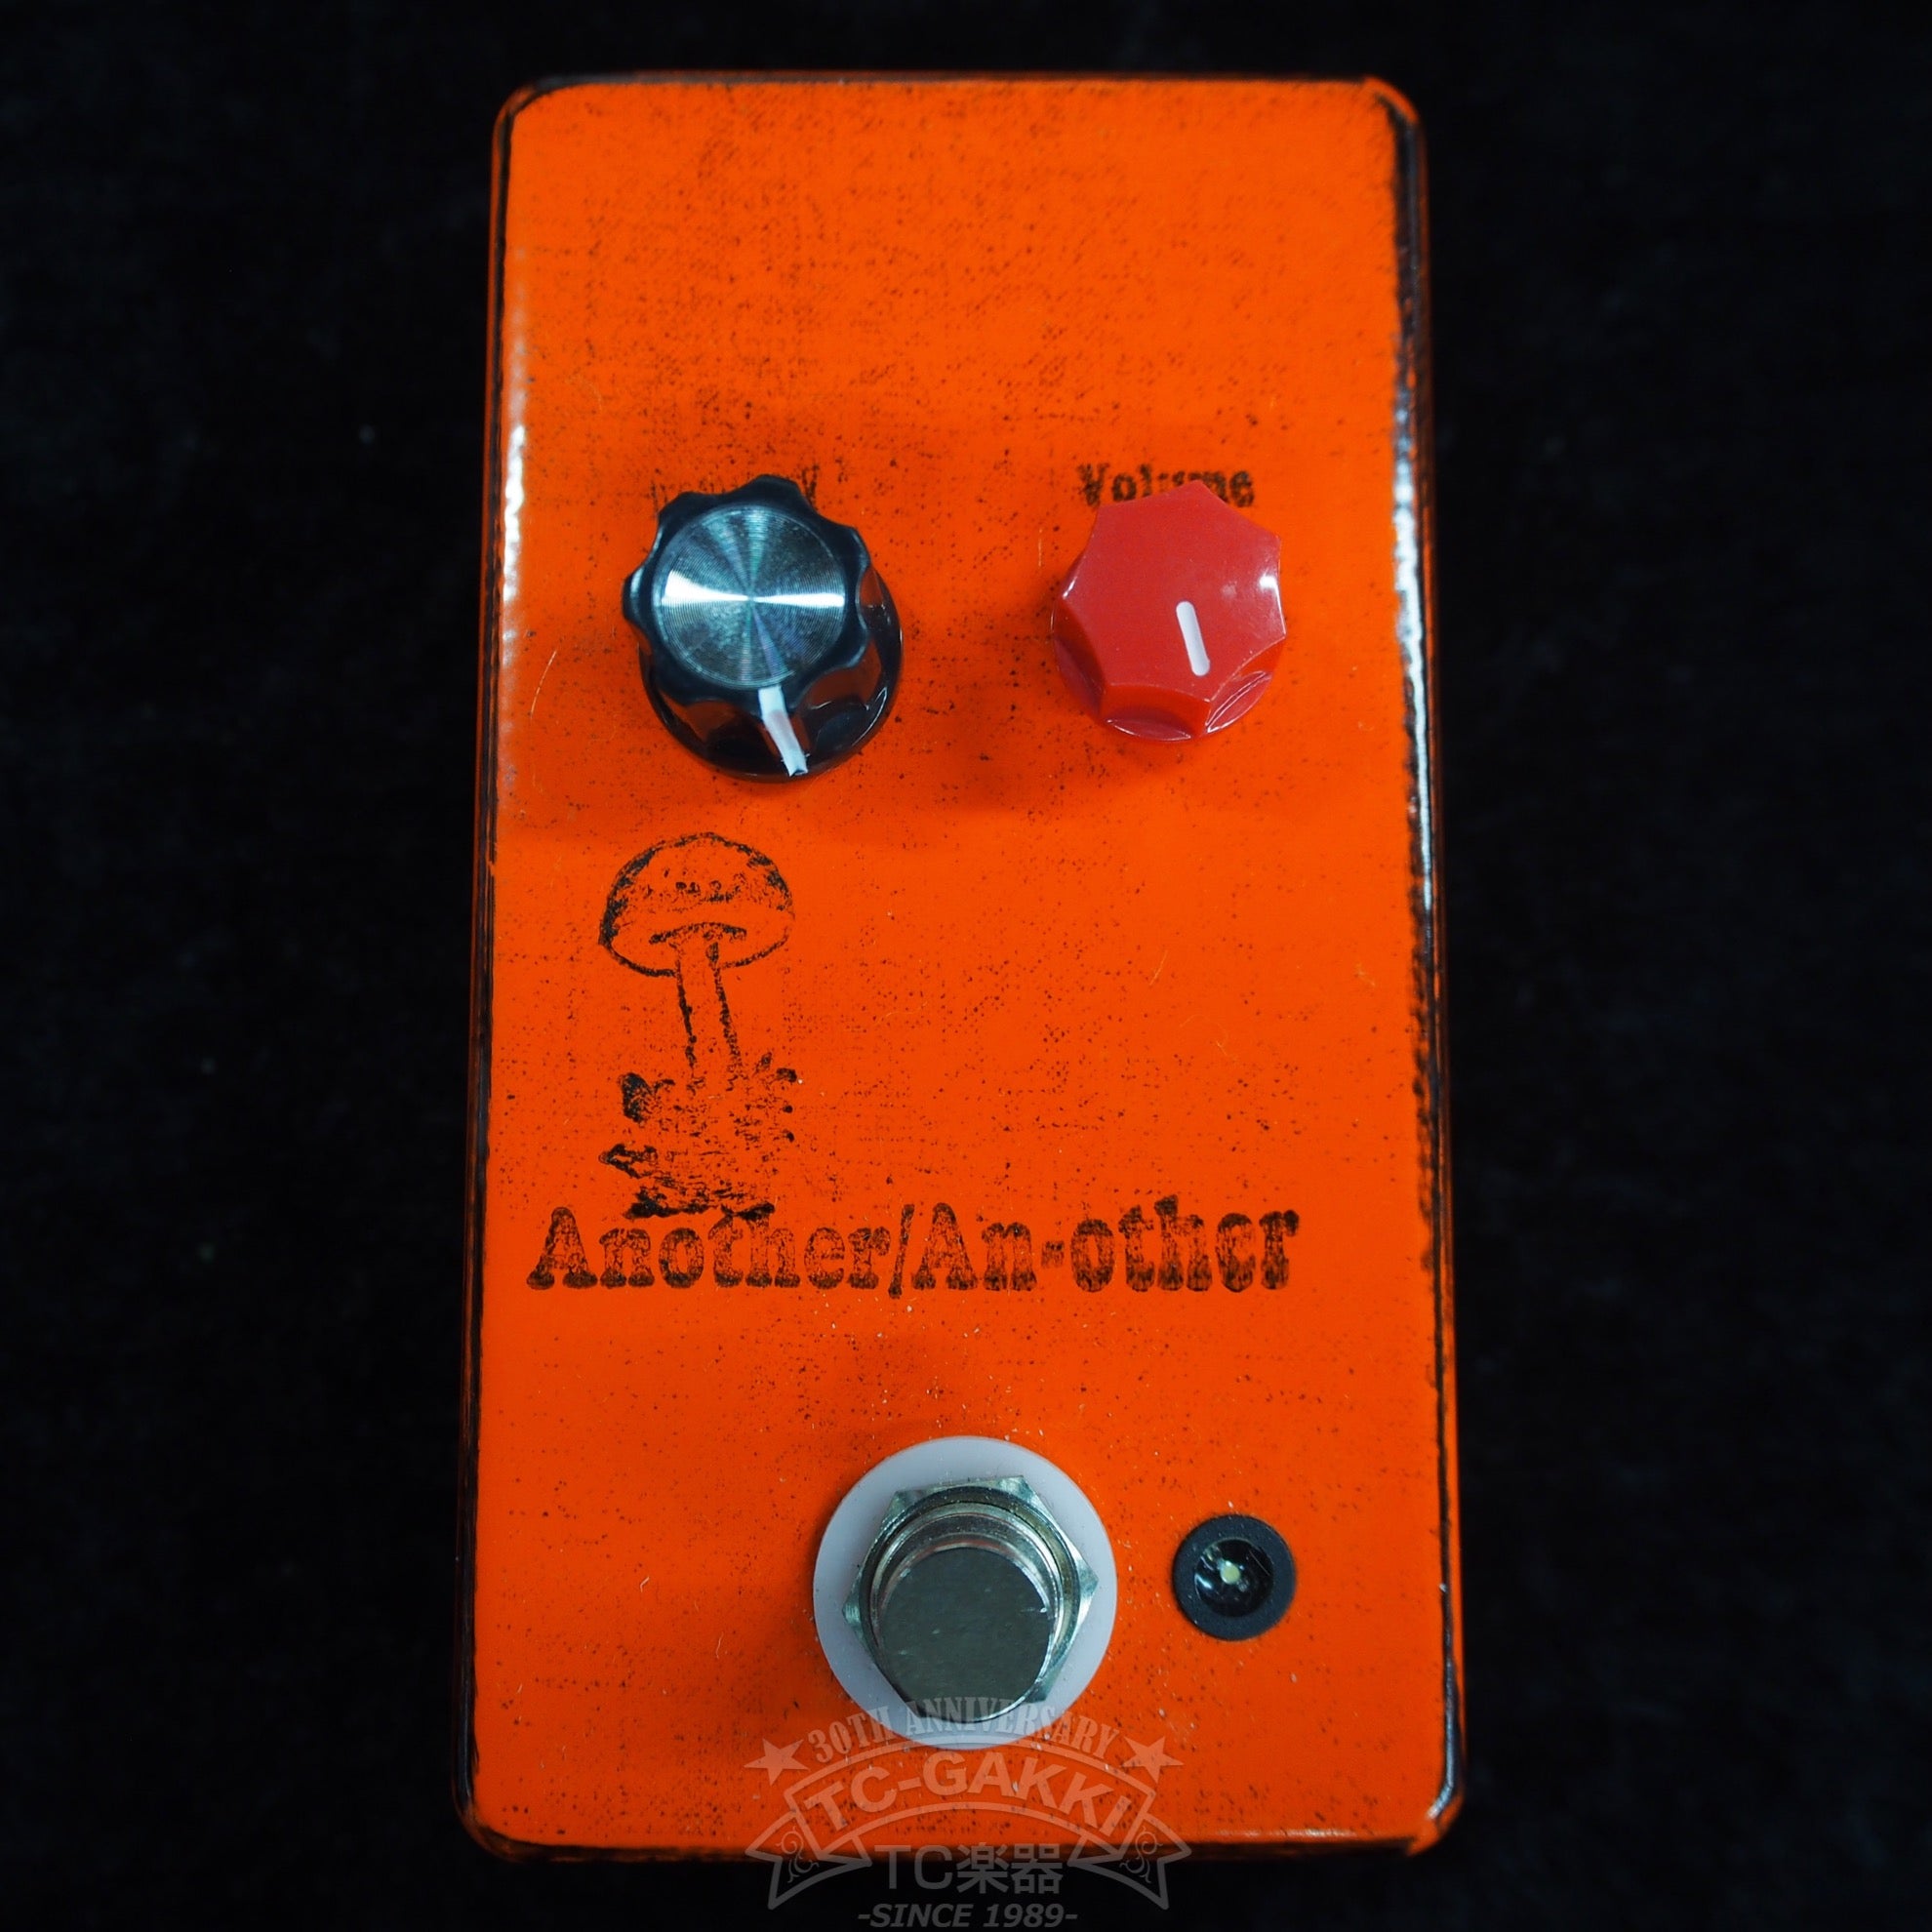 Another/An-other - TC楽器 - TCGAKKI